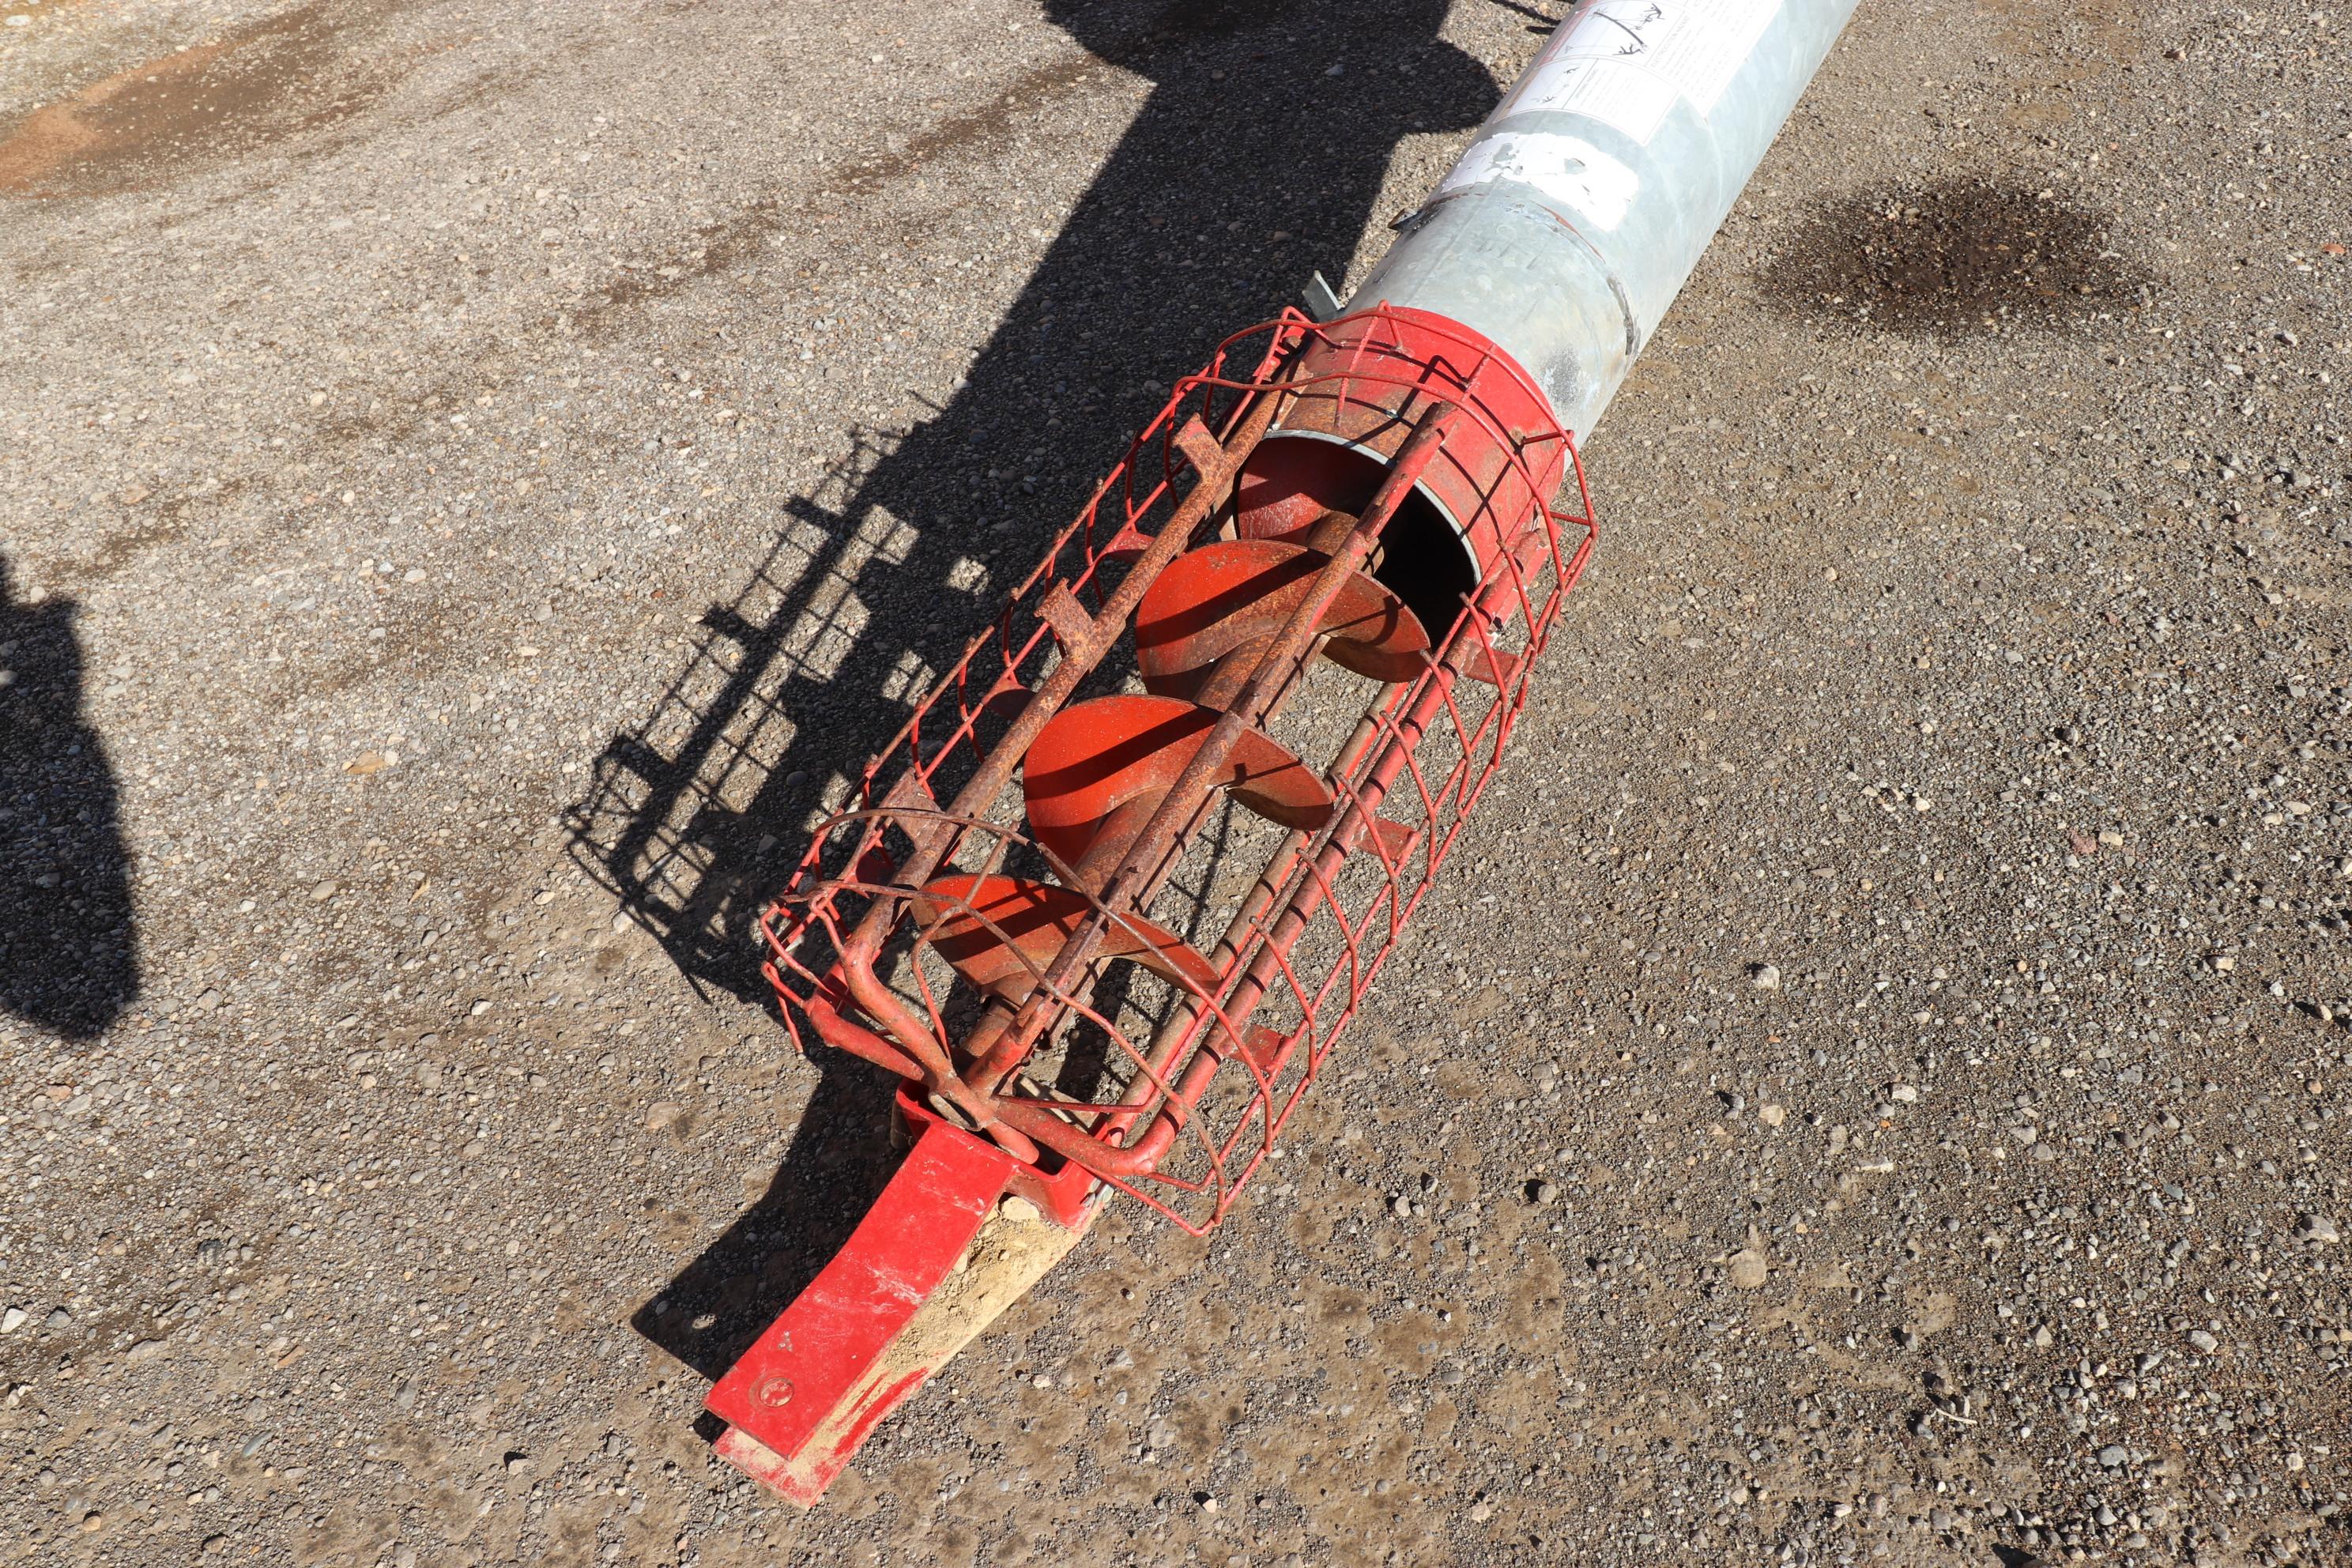 Wheatheart GHR 10”x61 auger set up for electric